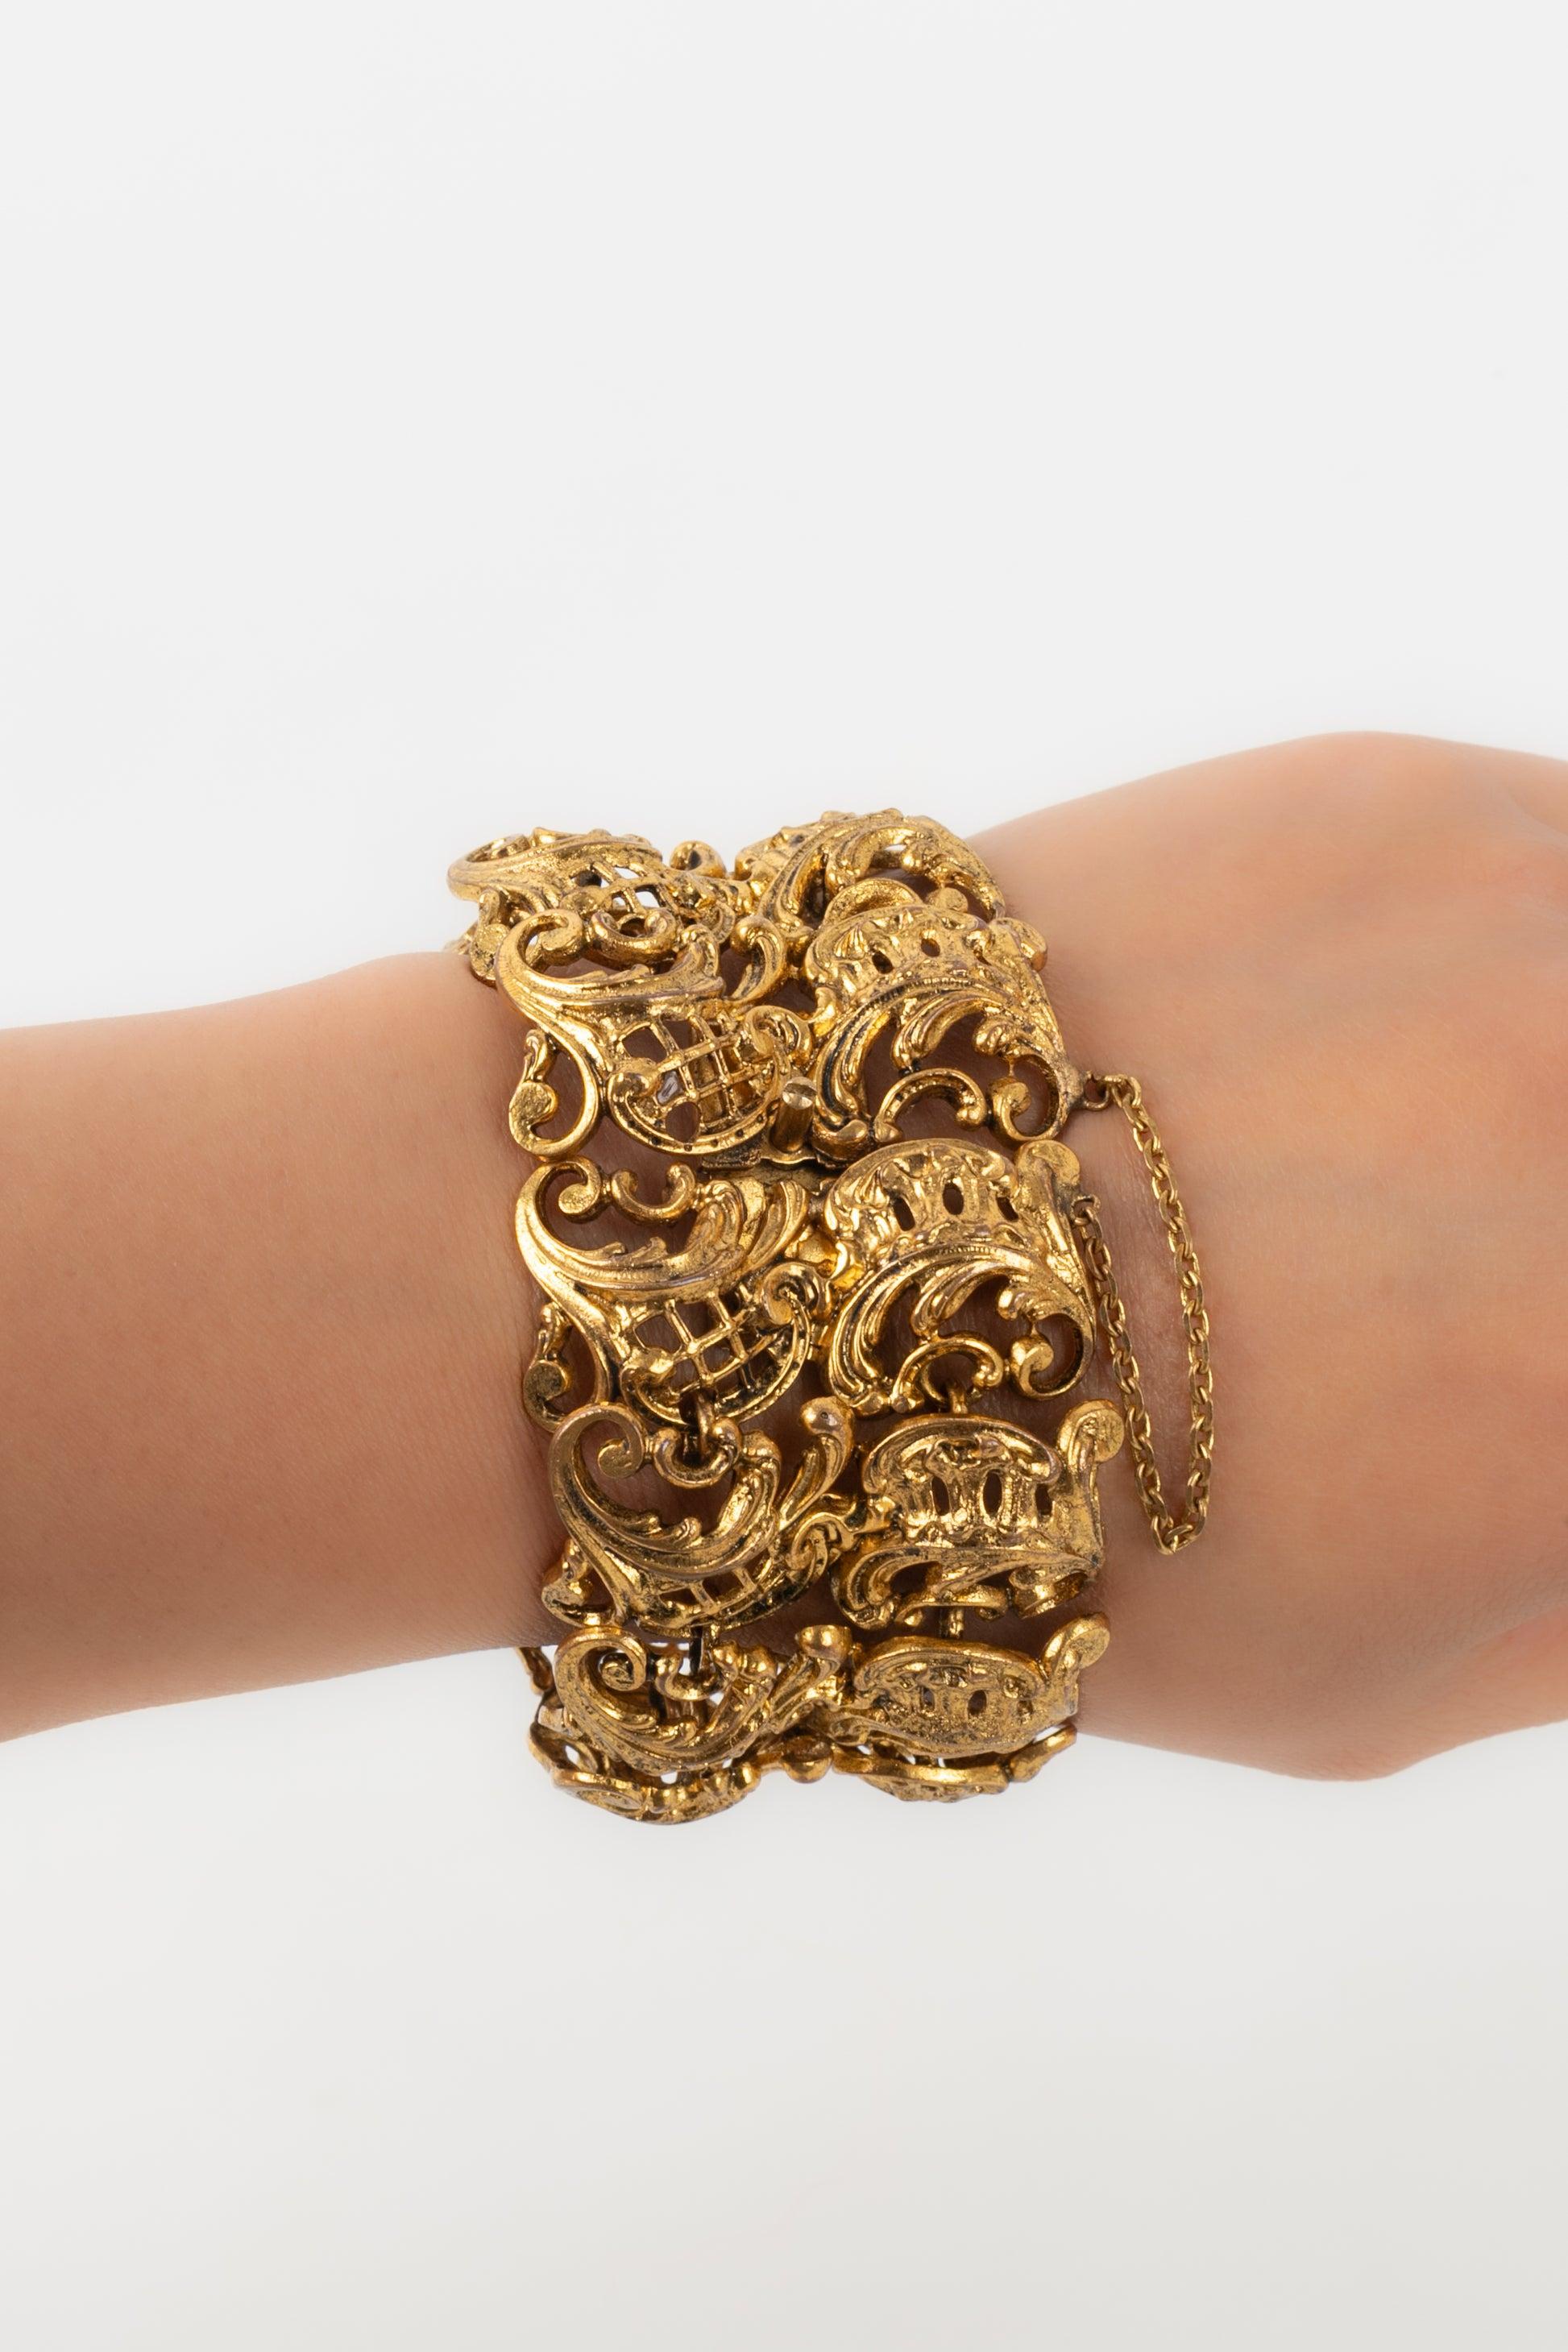 Chanel - Golden metal openwork bracelet. Haute couture jewelry from the Coco era.

Additional information:
Condition: Very good condition
Dimensions: Length: 17 cm

Seller Reference: BRAB74
